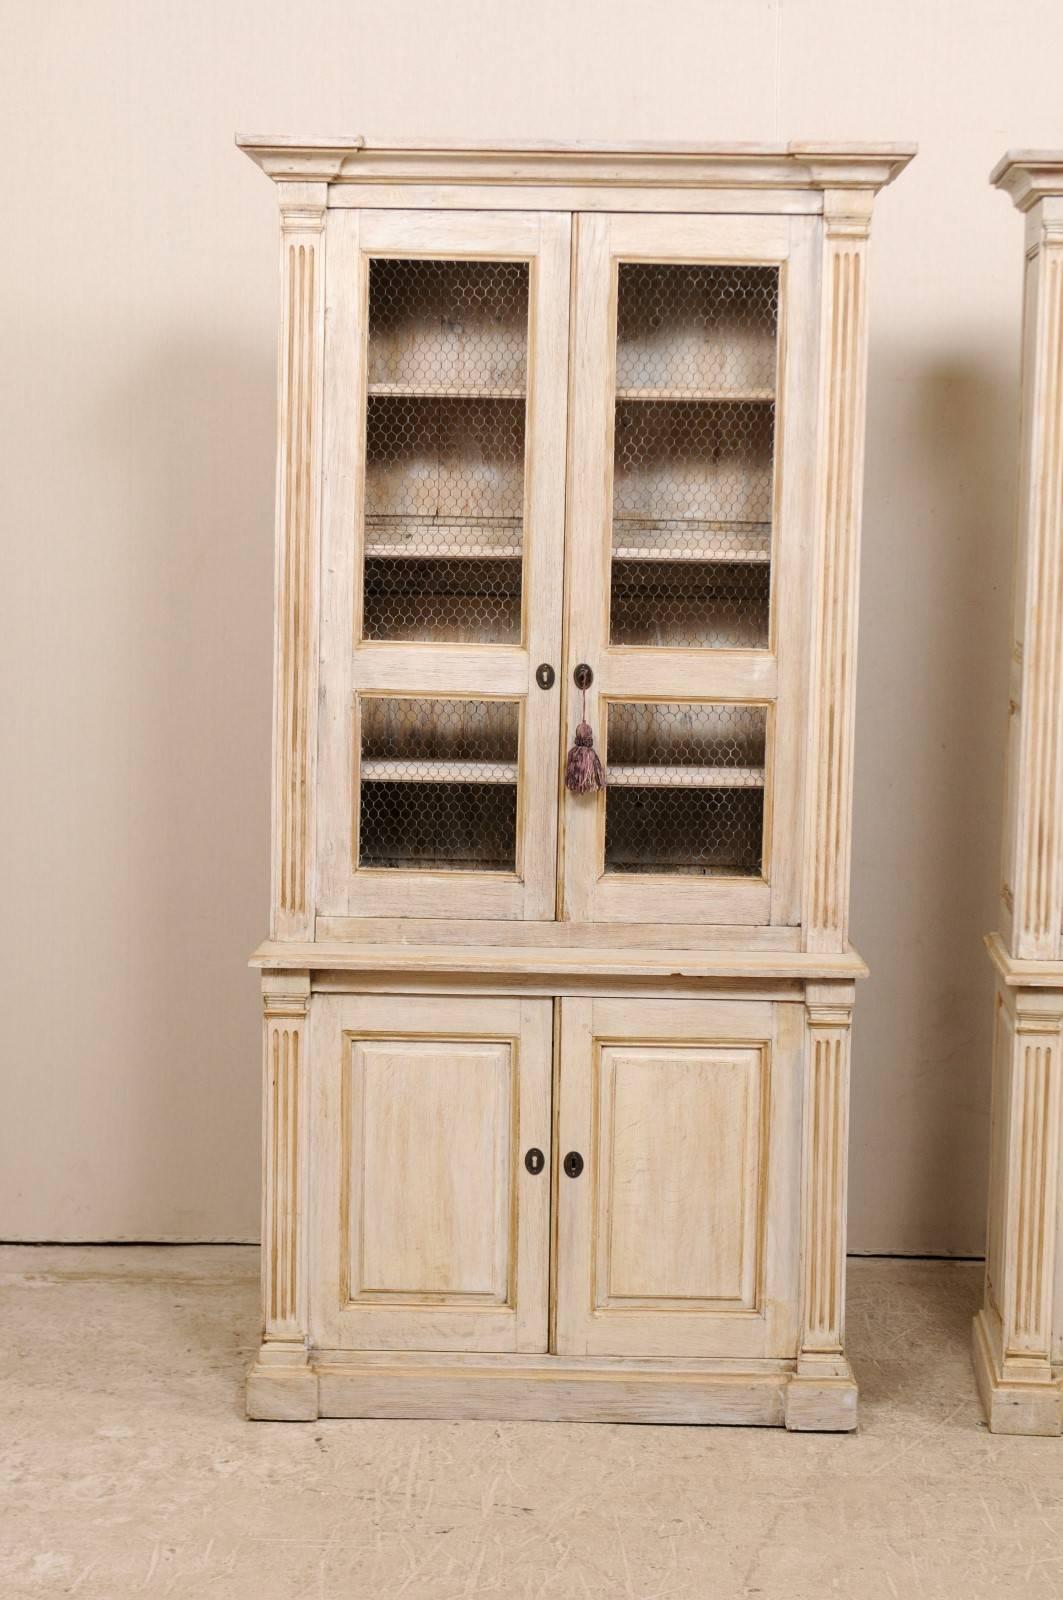 French Pair of 19th Century Tall Painted Wood Cabinets with Wire on the Cabinet Doors